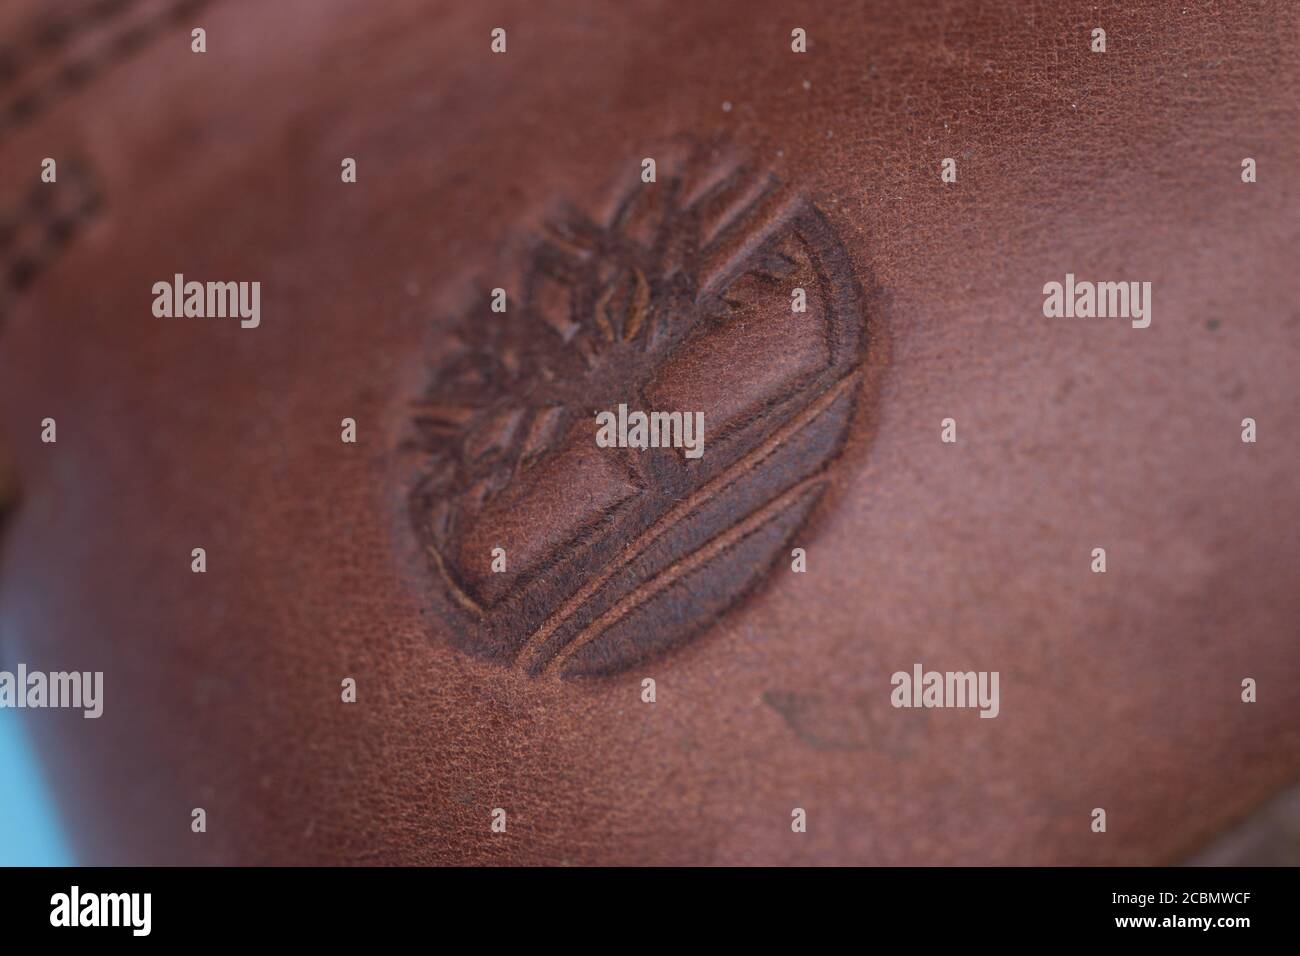 Moscow, Russia - 1 June 2020: Timberland logo close-up on leather, Illustrative Editorial Stock Photo